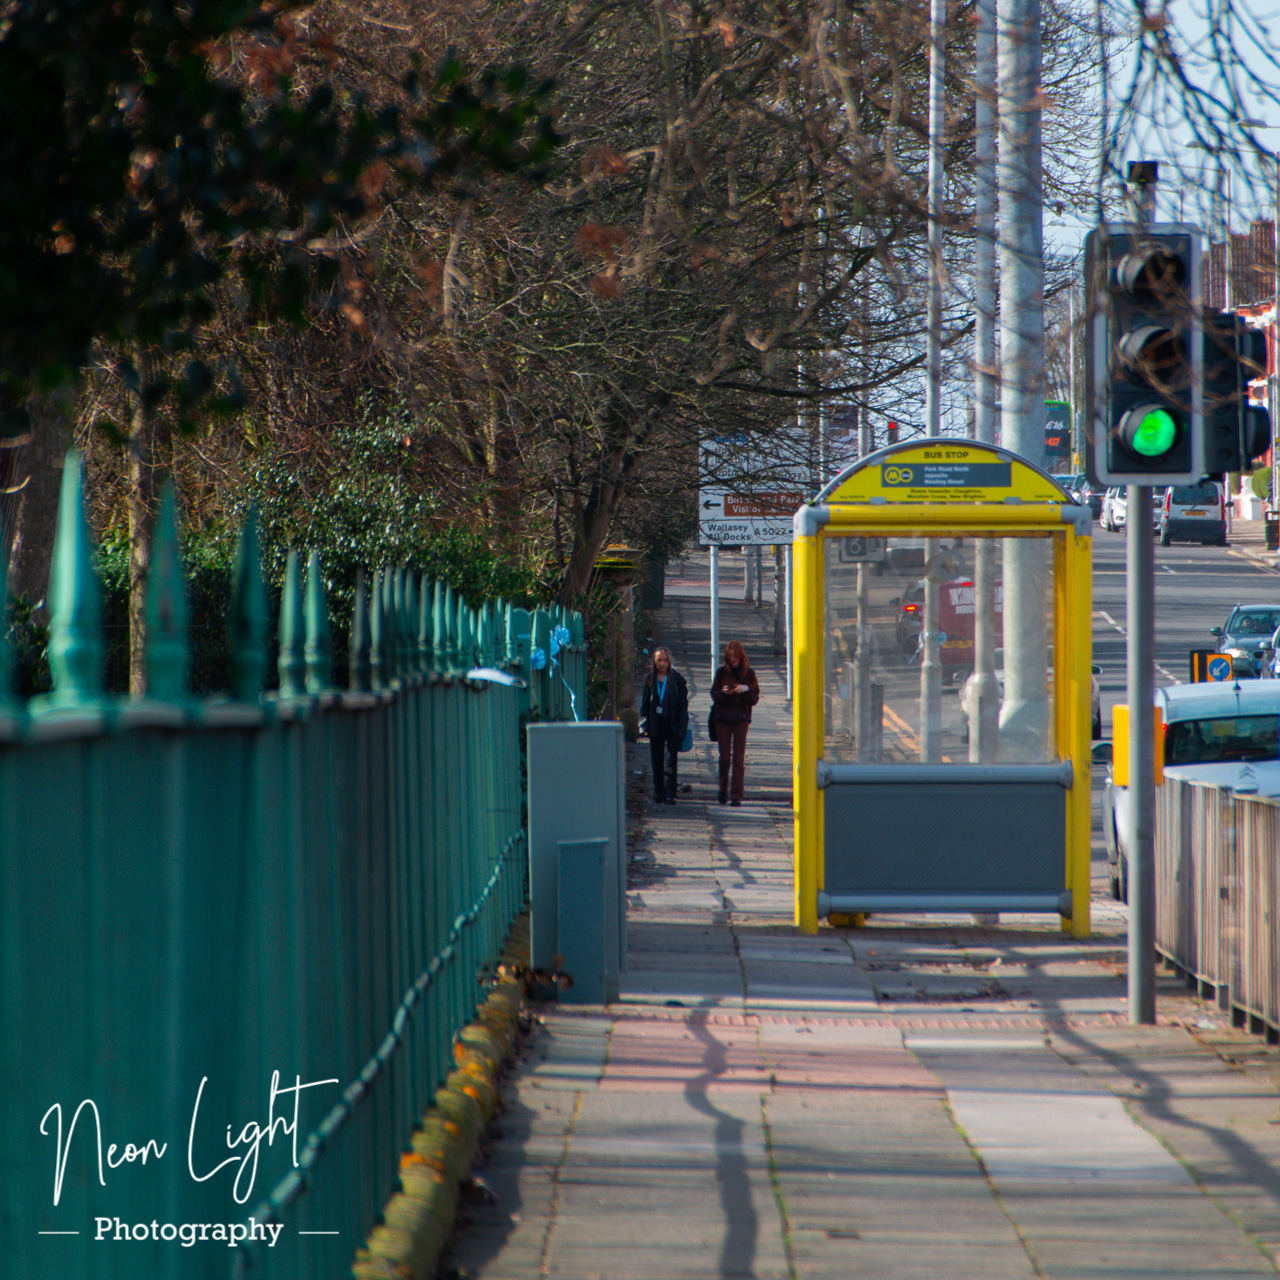 Bus Stops and Traffic Lights